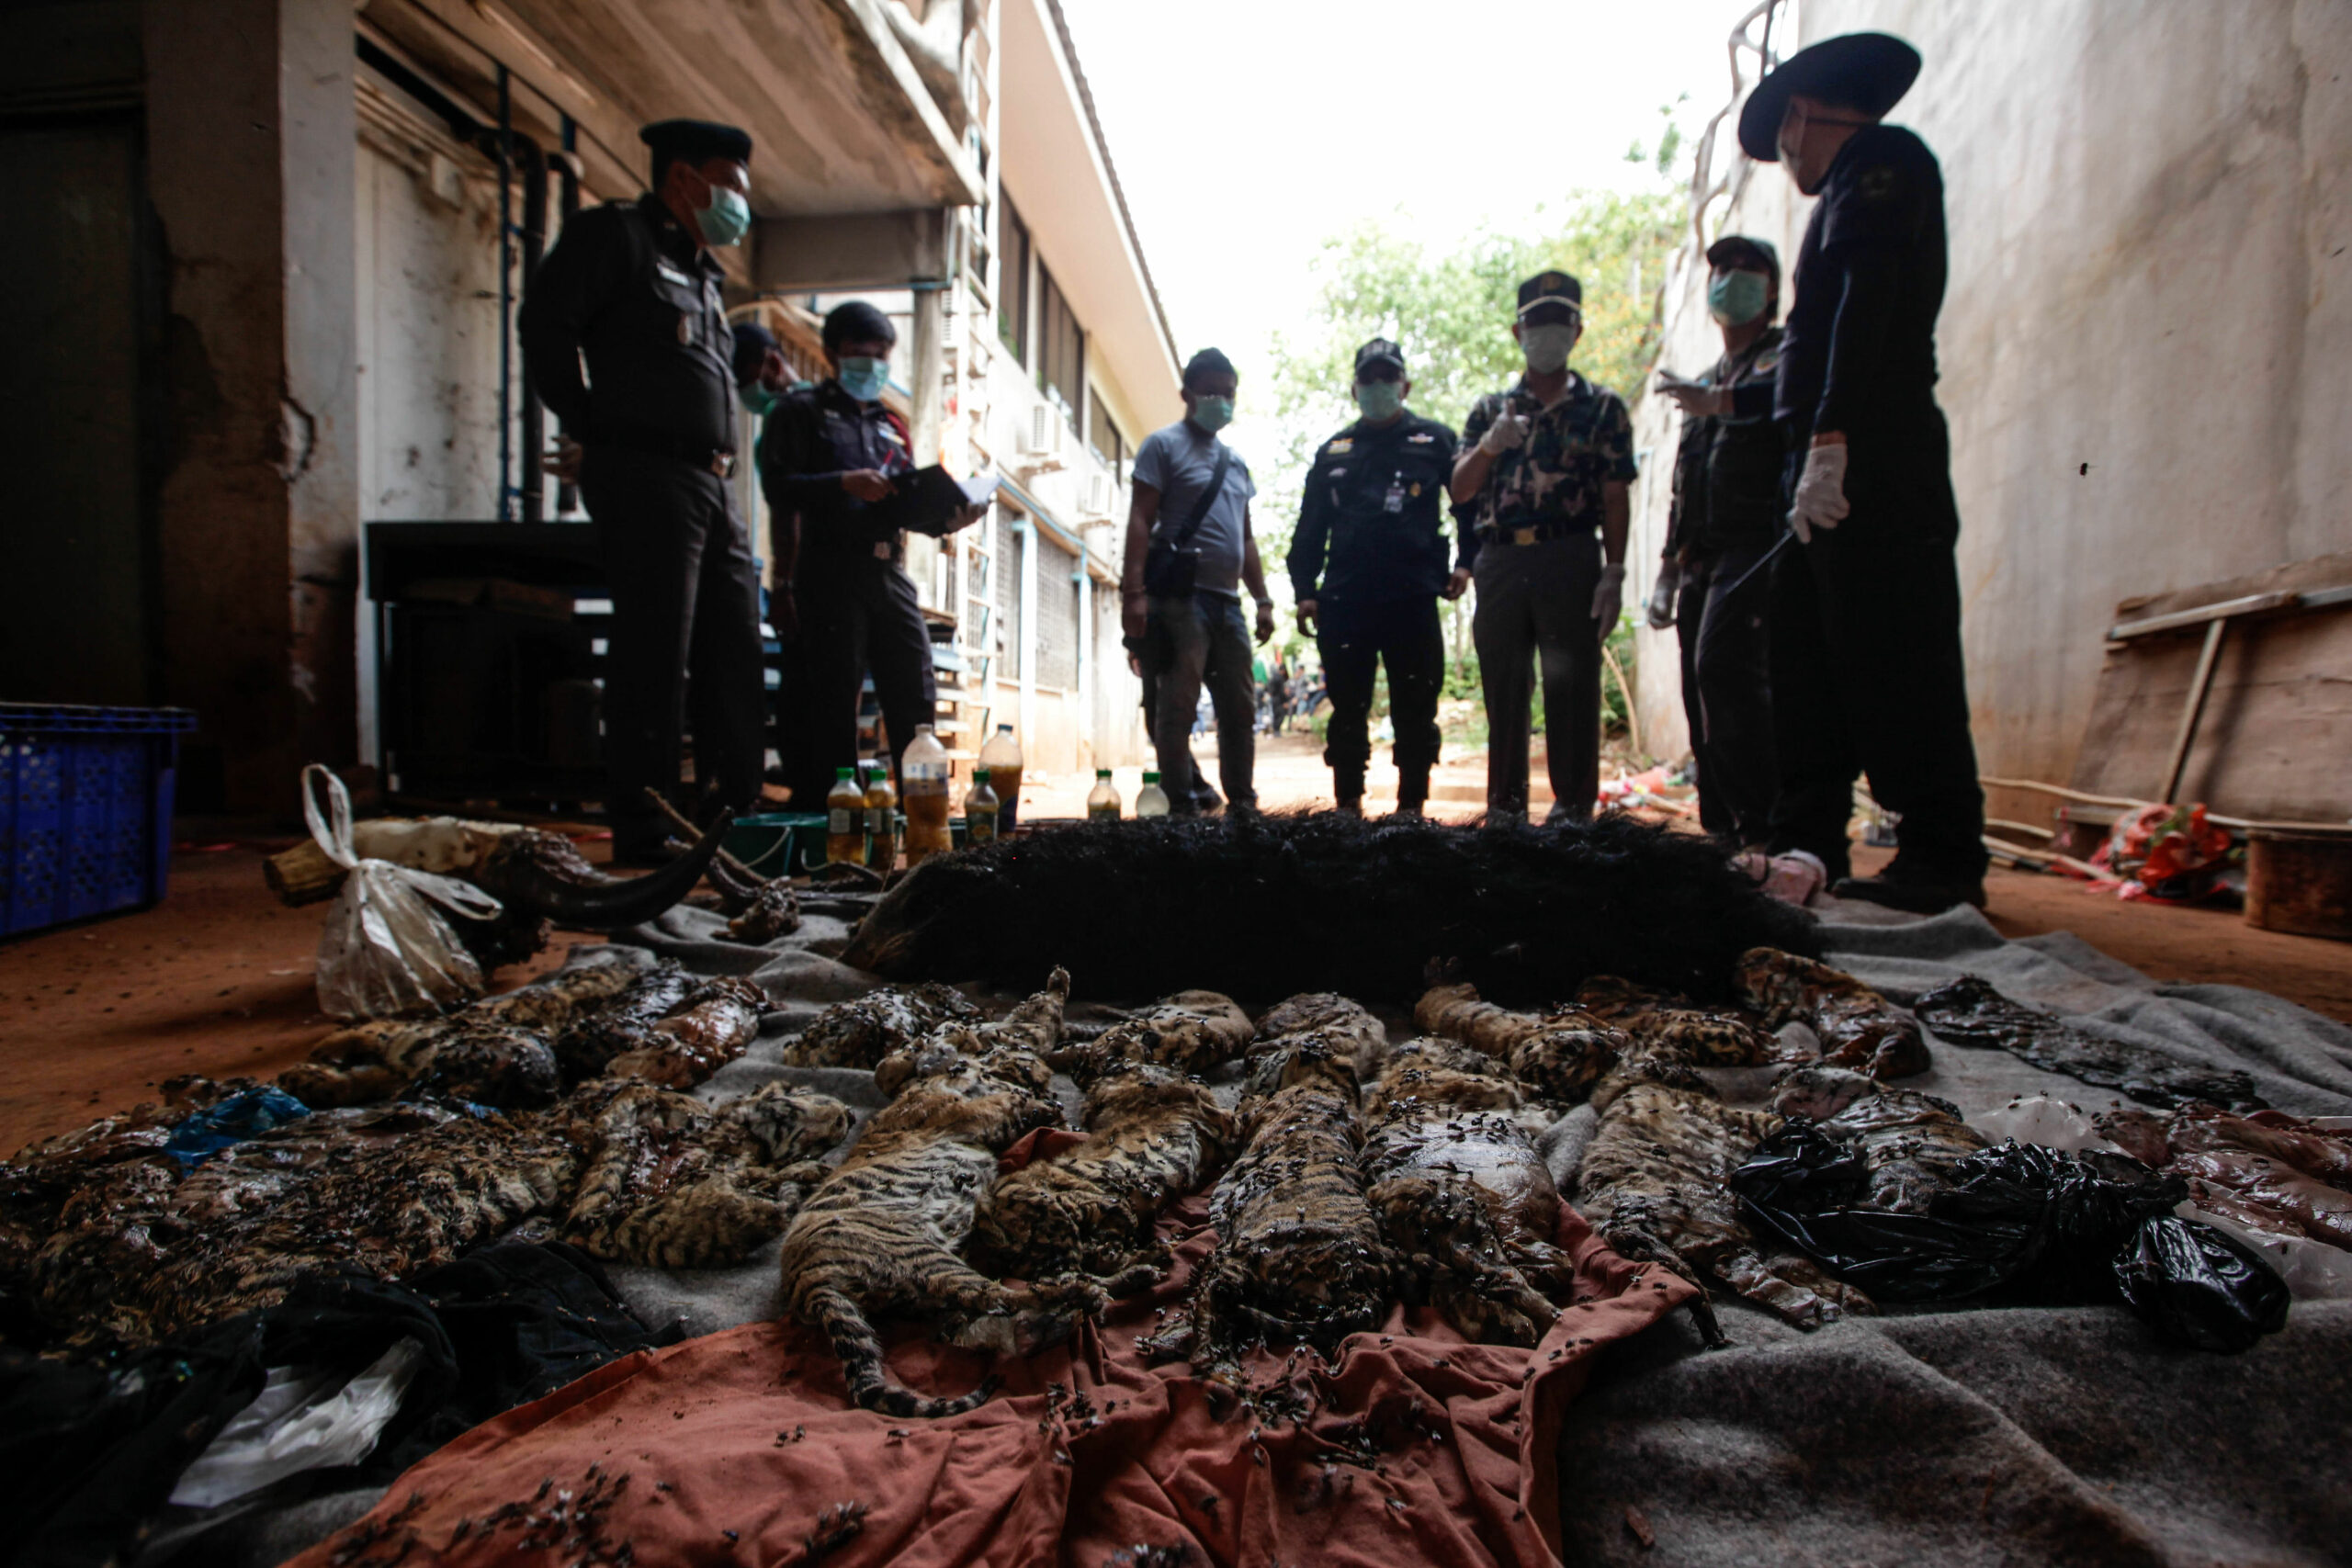 KANCHANABURI, THAILAND - JUNE 1: Thai DNP officers observe the carcasses of 40 tiger cubs and a binturong (also known as a bearcat) found undeclared at the Wat Pha Luang Ta Bua Tiger Temple on June 1, 2016 in Kanchanaburi province, Thailand. Wildlife authorities in Thailand raided a Buddhist temple in Kanchanaburi province where 137 tigers were kept, following accusations the monks were illegally breeding and trafficking endangered animals. Forty of the 137 tigers were rescued by Tuesday from the country's infamous 'Tiger Temple' despite opposition from the temple authorities.